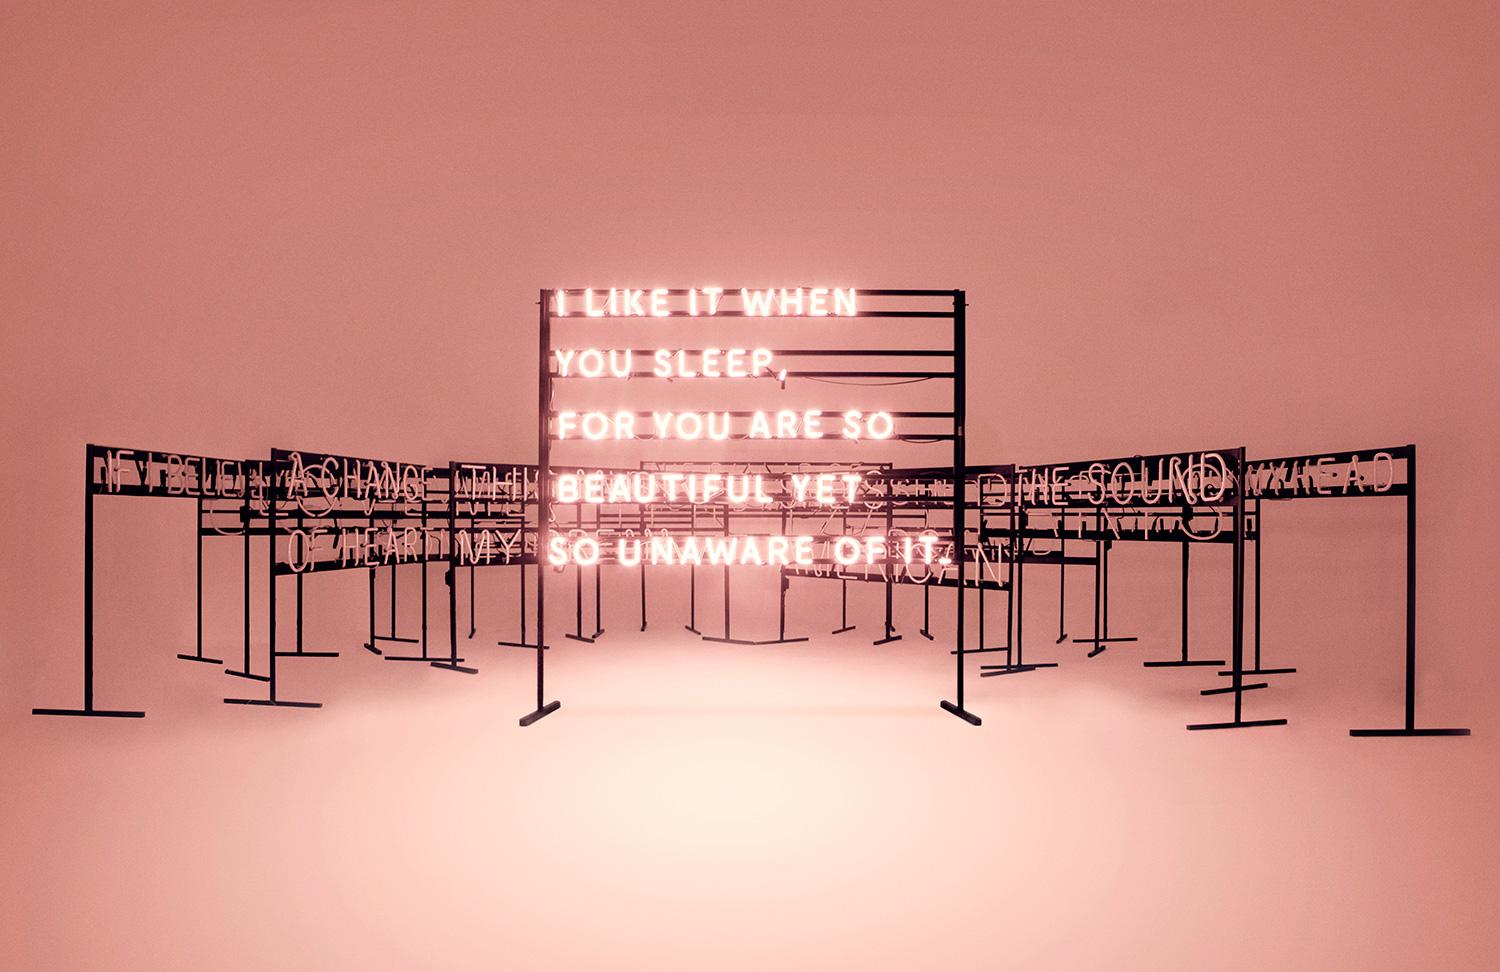 The 1975: Neon Signs